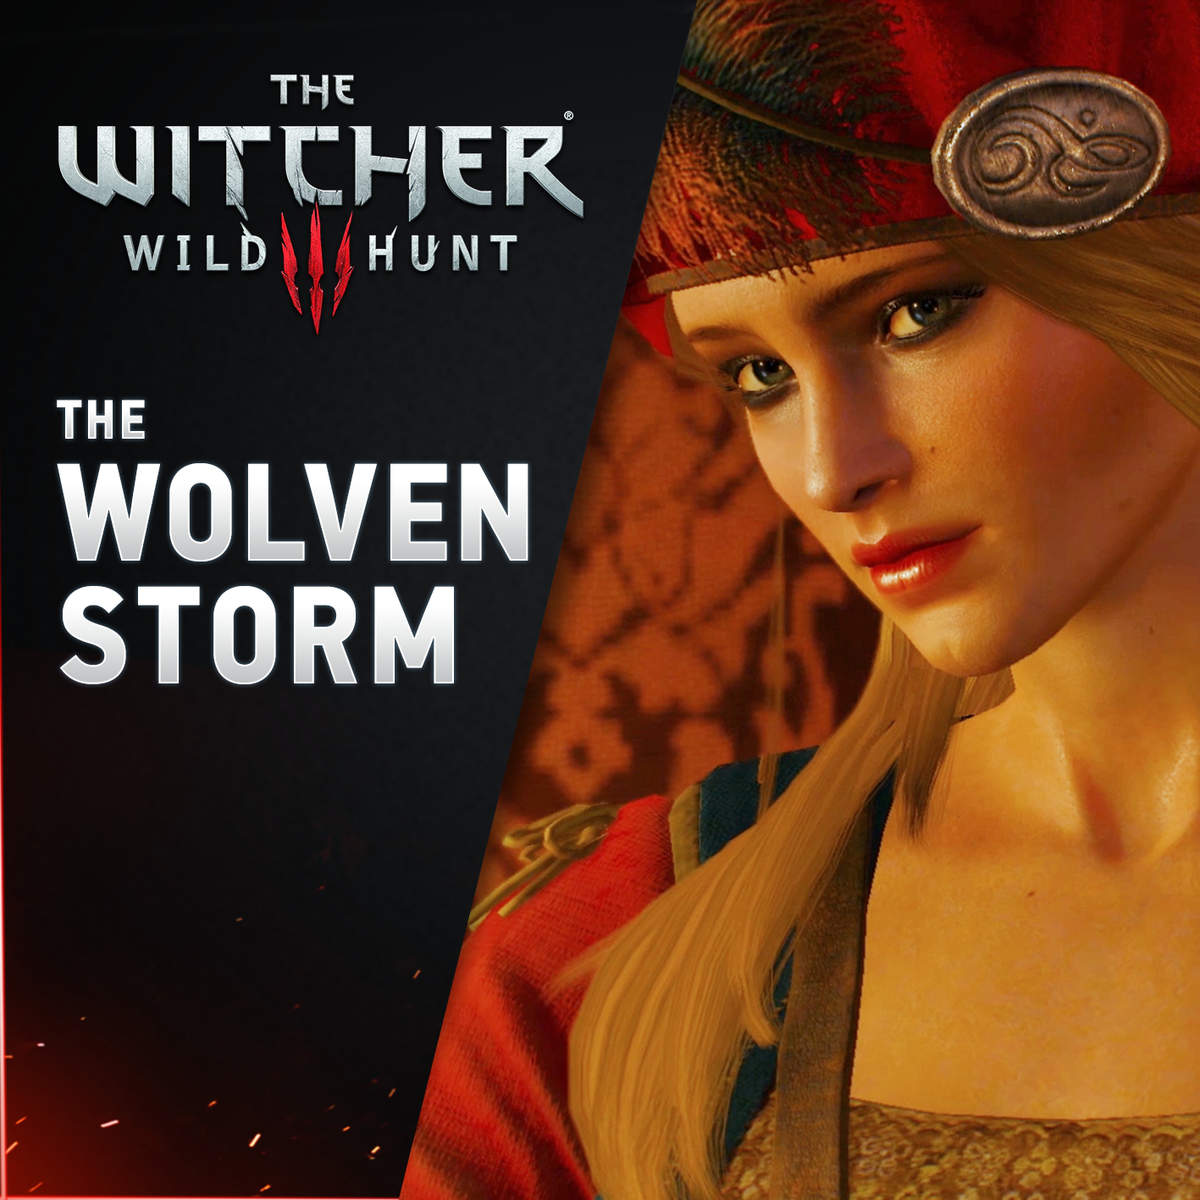 The wolven storm russian the witcher 3 (119) фото